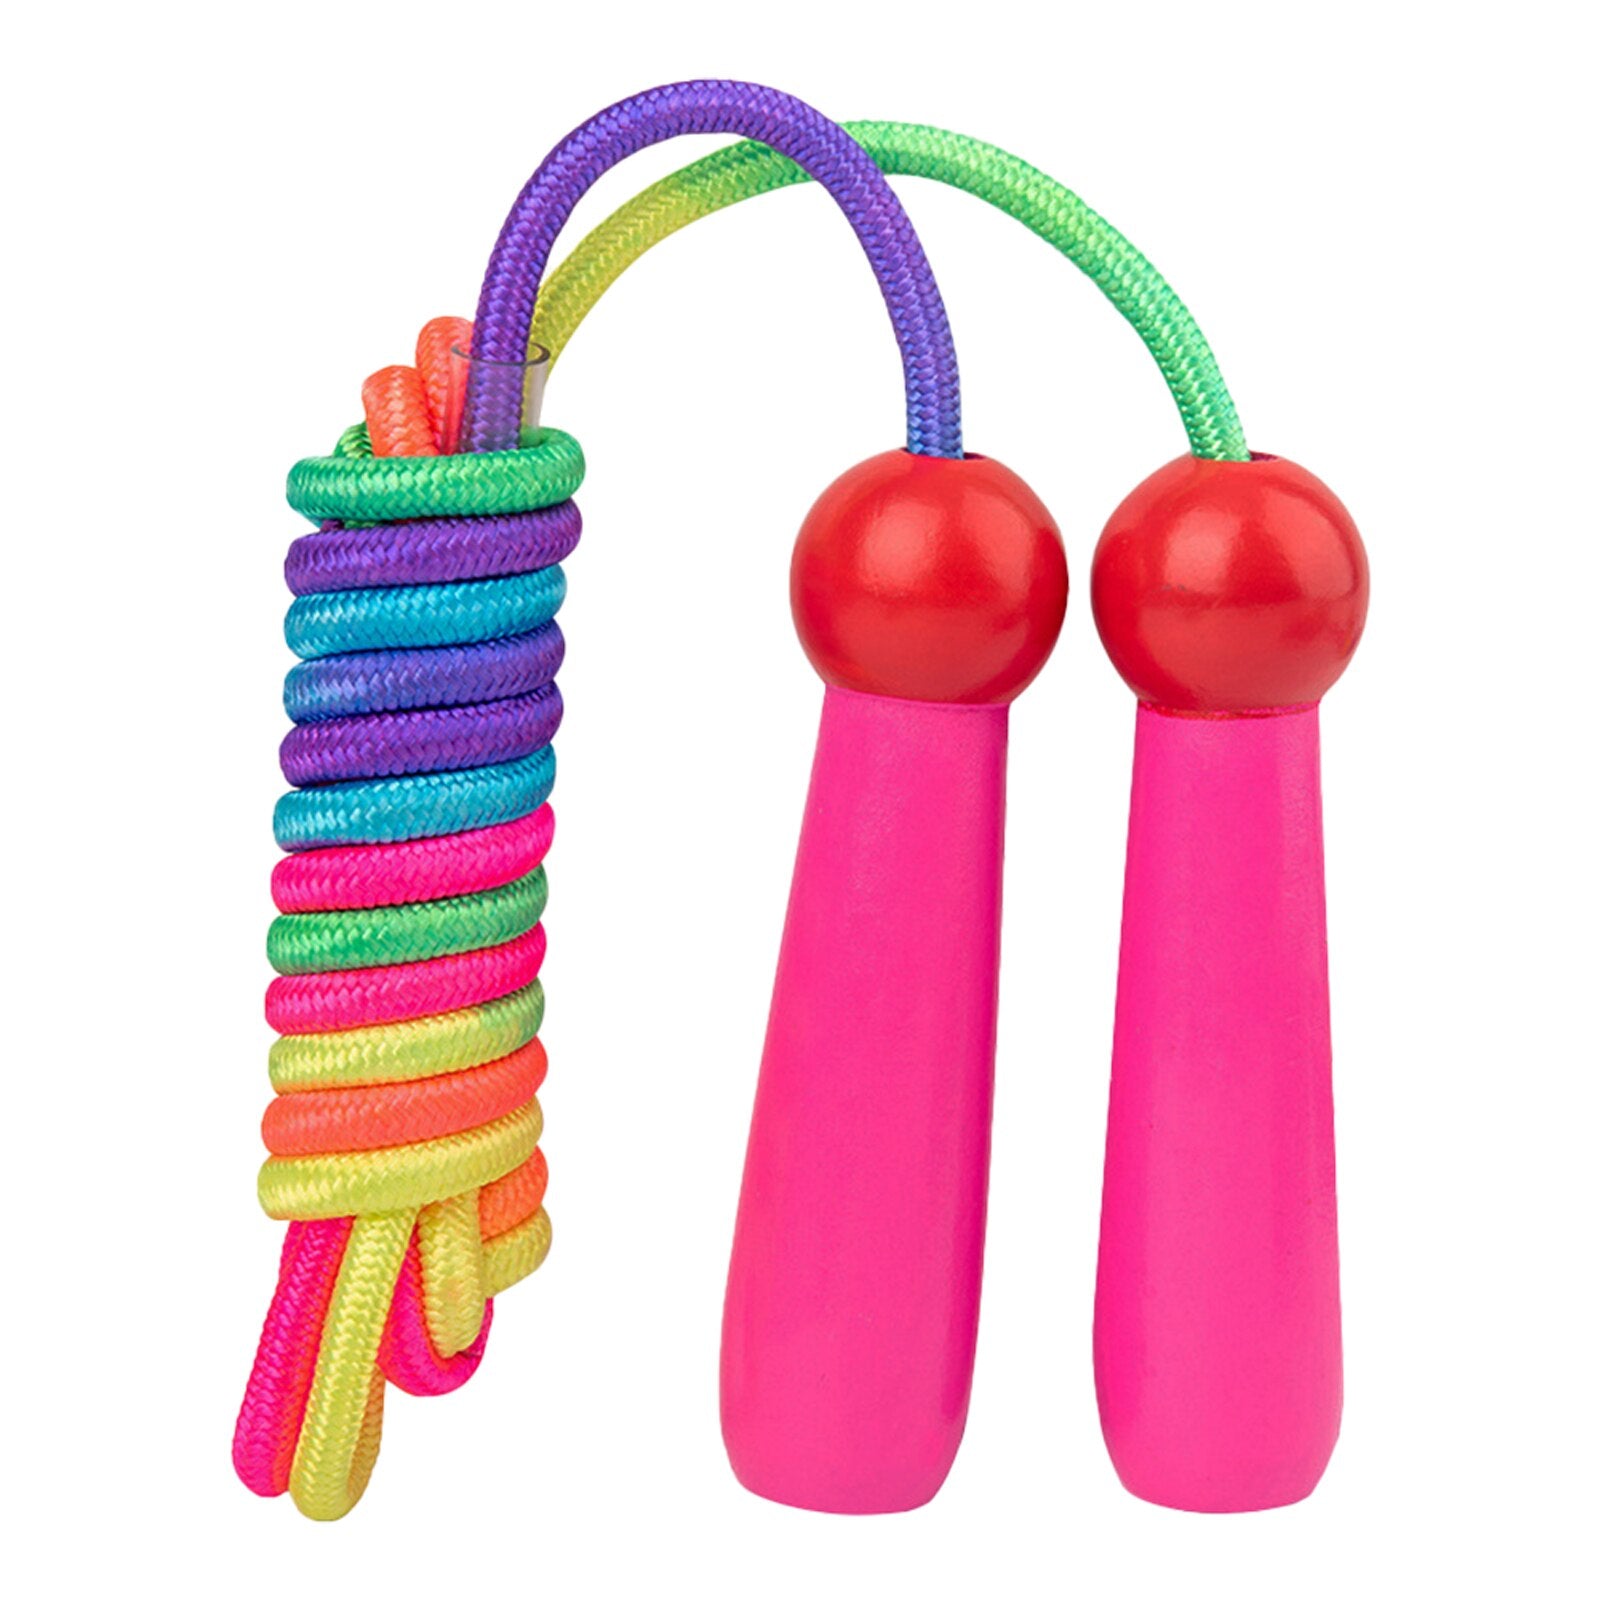 Gym Wooden Jumping Skipping Rope Pink